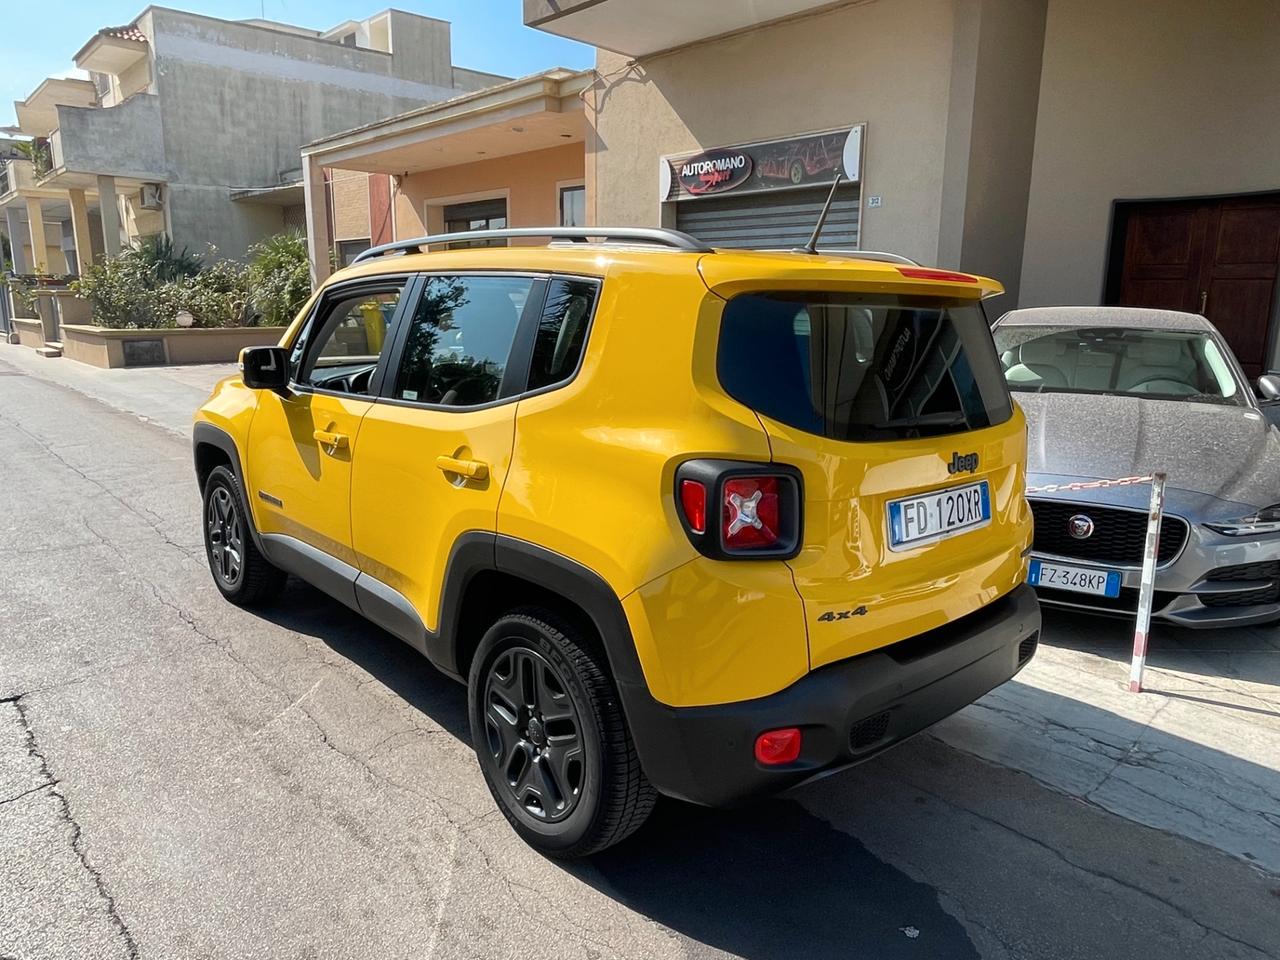 Jeep Renegade 2.0 Mjt 4WD Active Drive Night Eagle